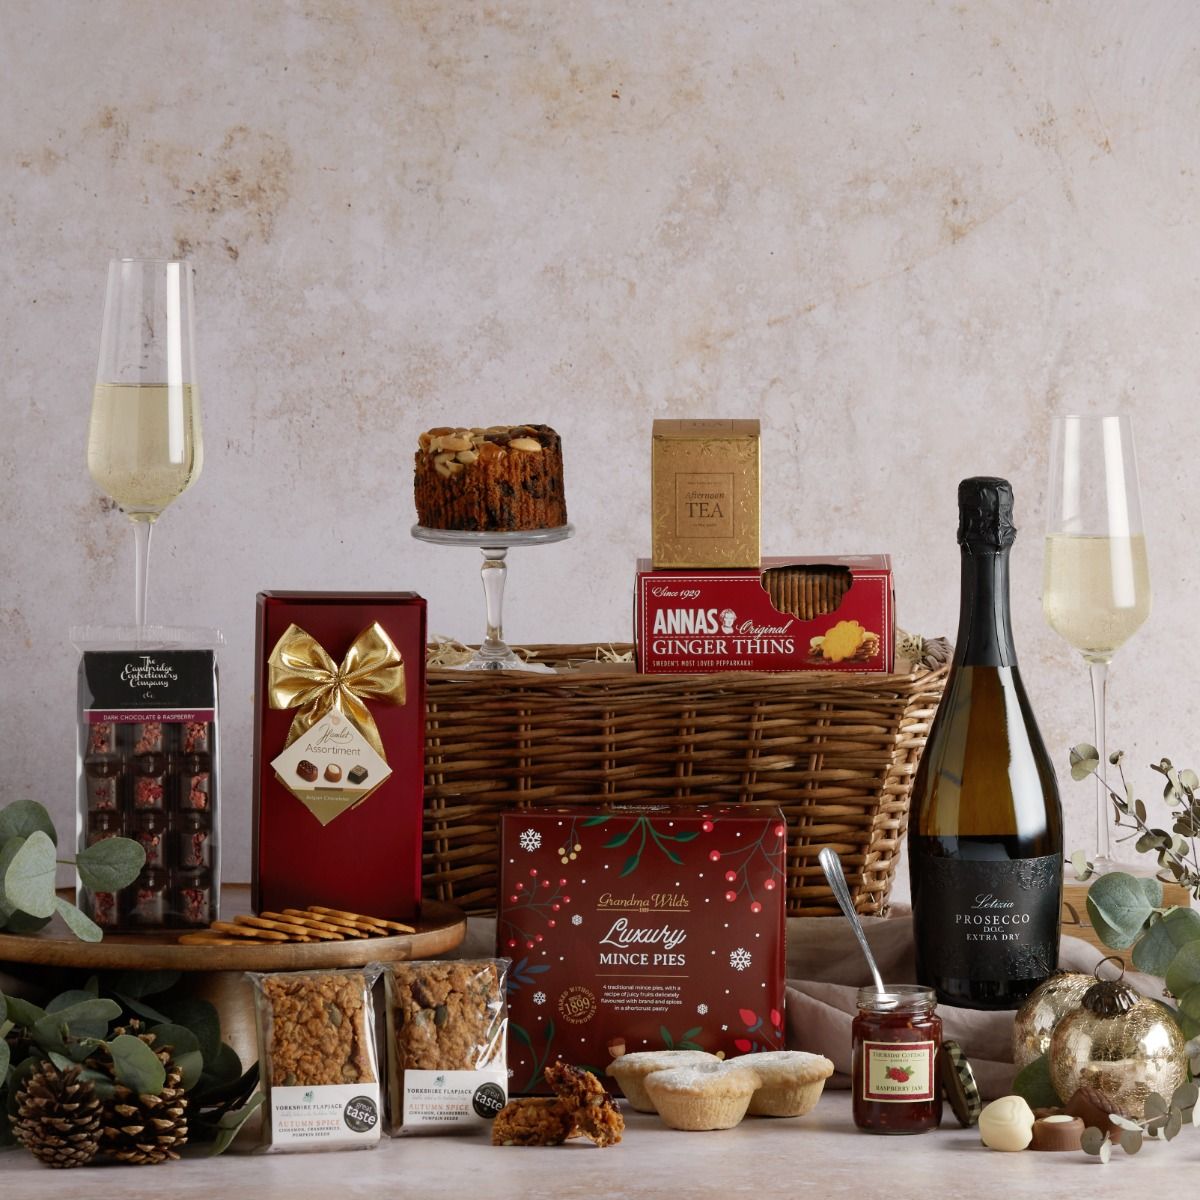 Festive afternoon tea hamper with all its contents on display and a wicker basket